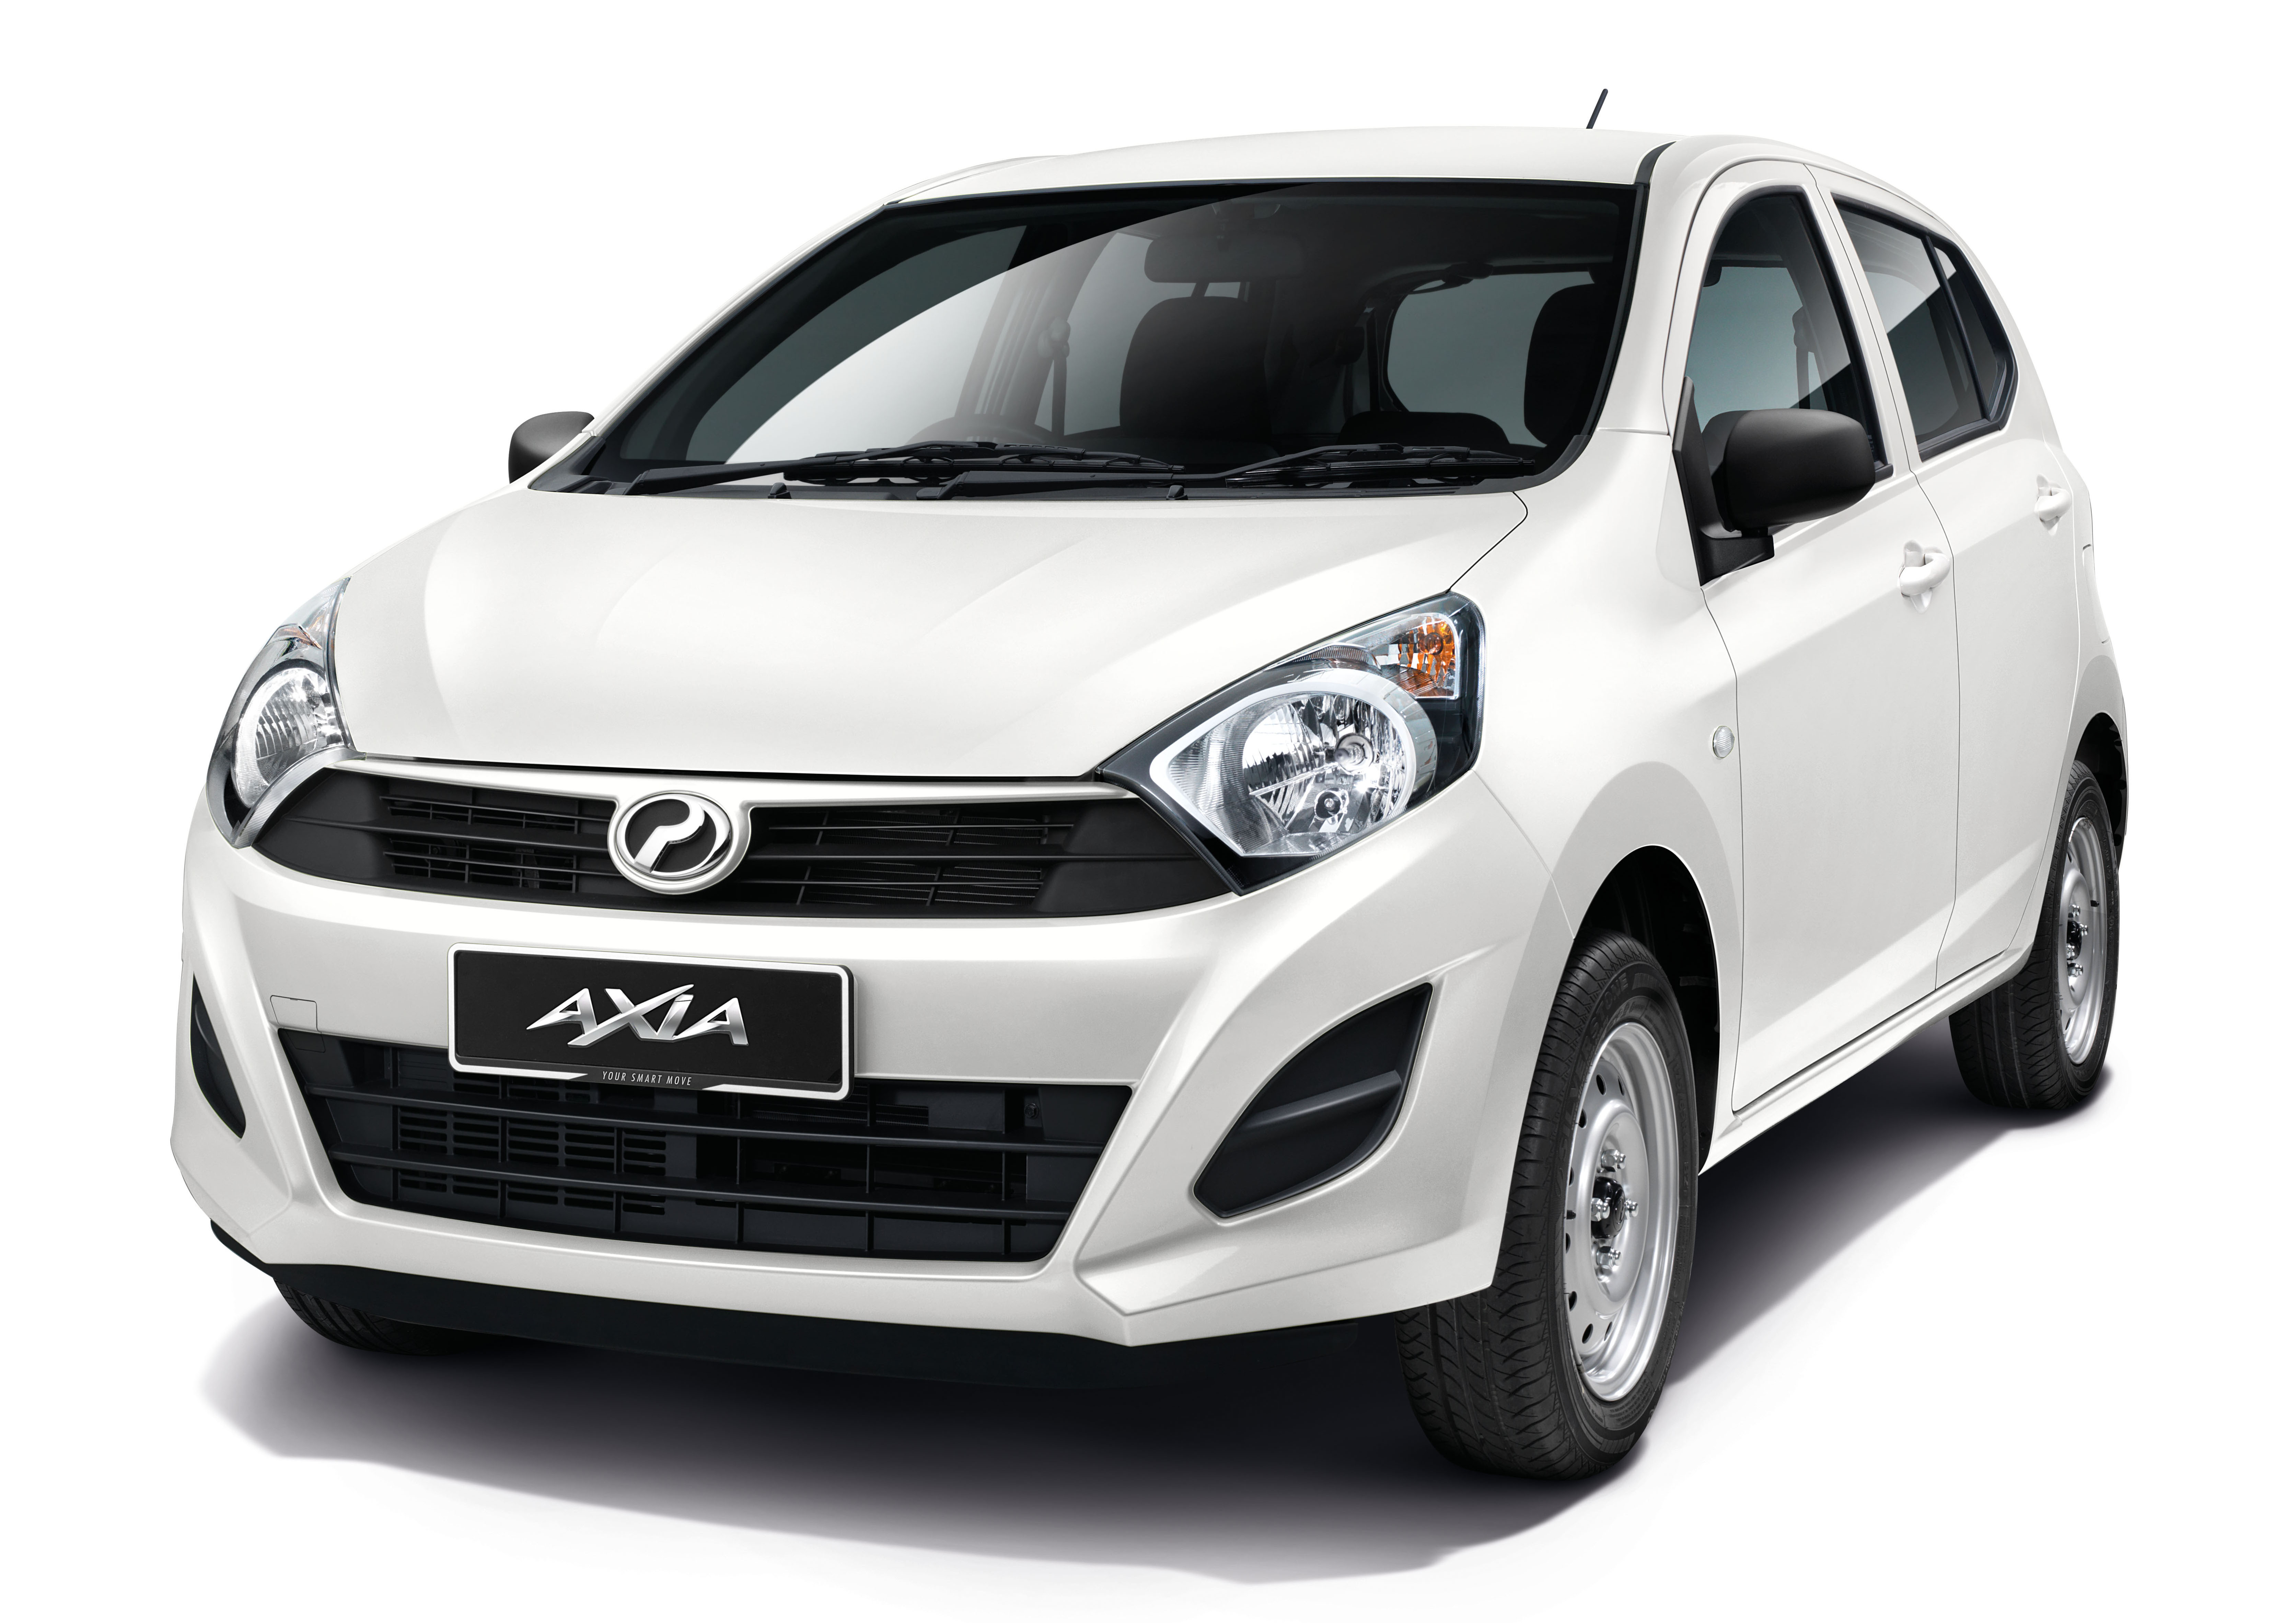 Enjoy . Life: Perodua Axia launched - final prices lower ...